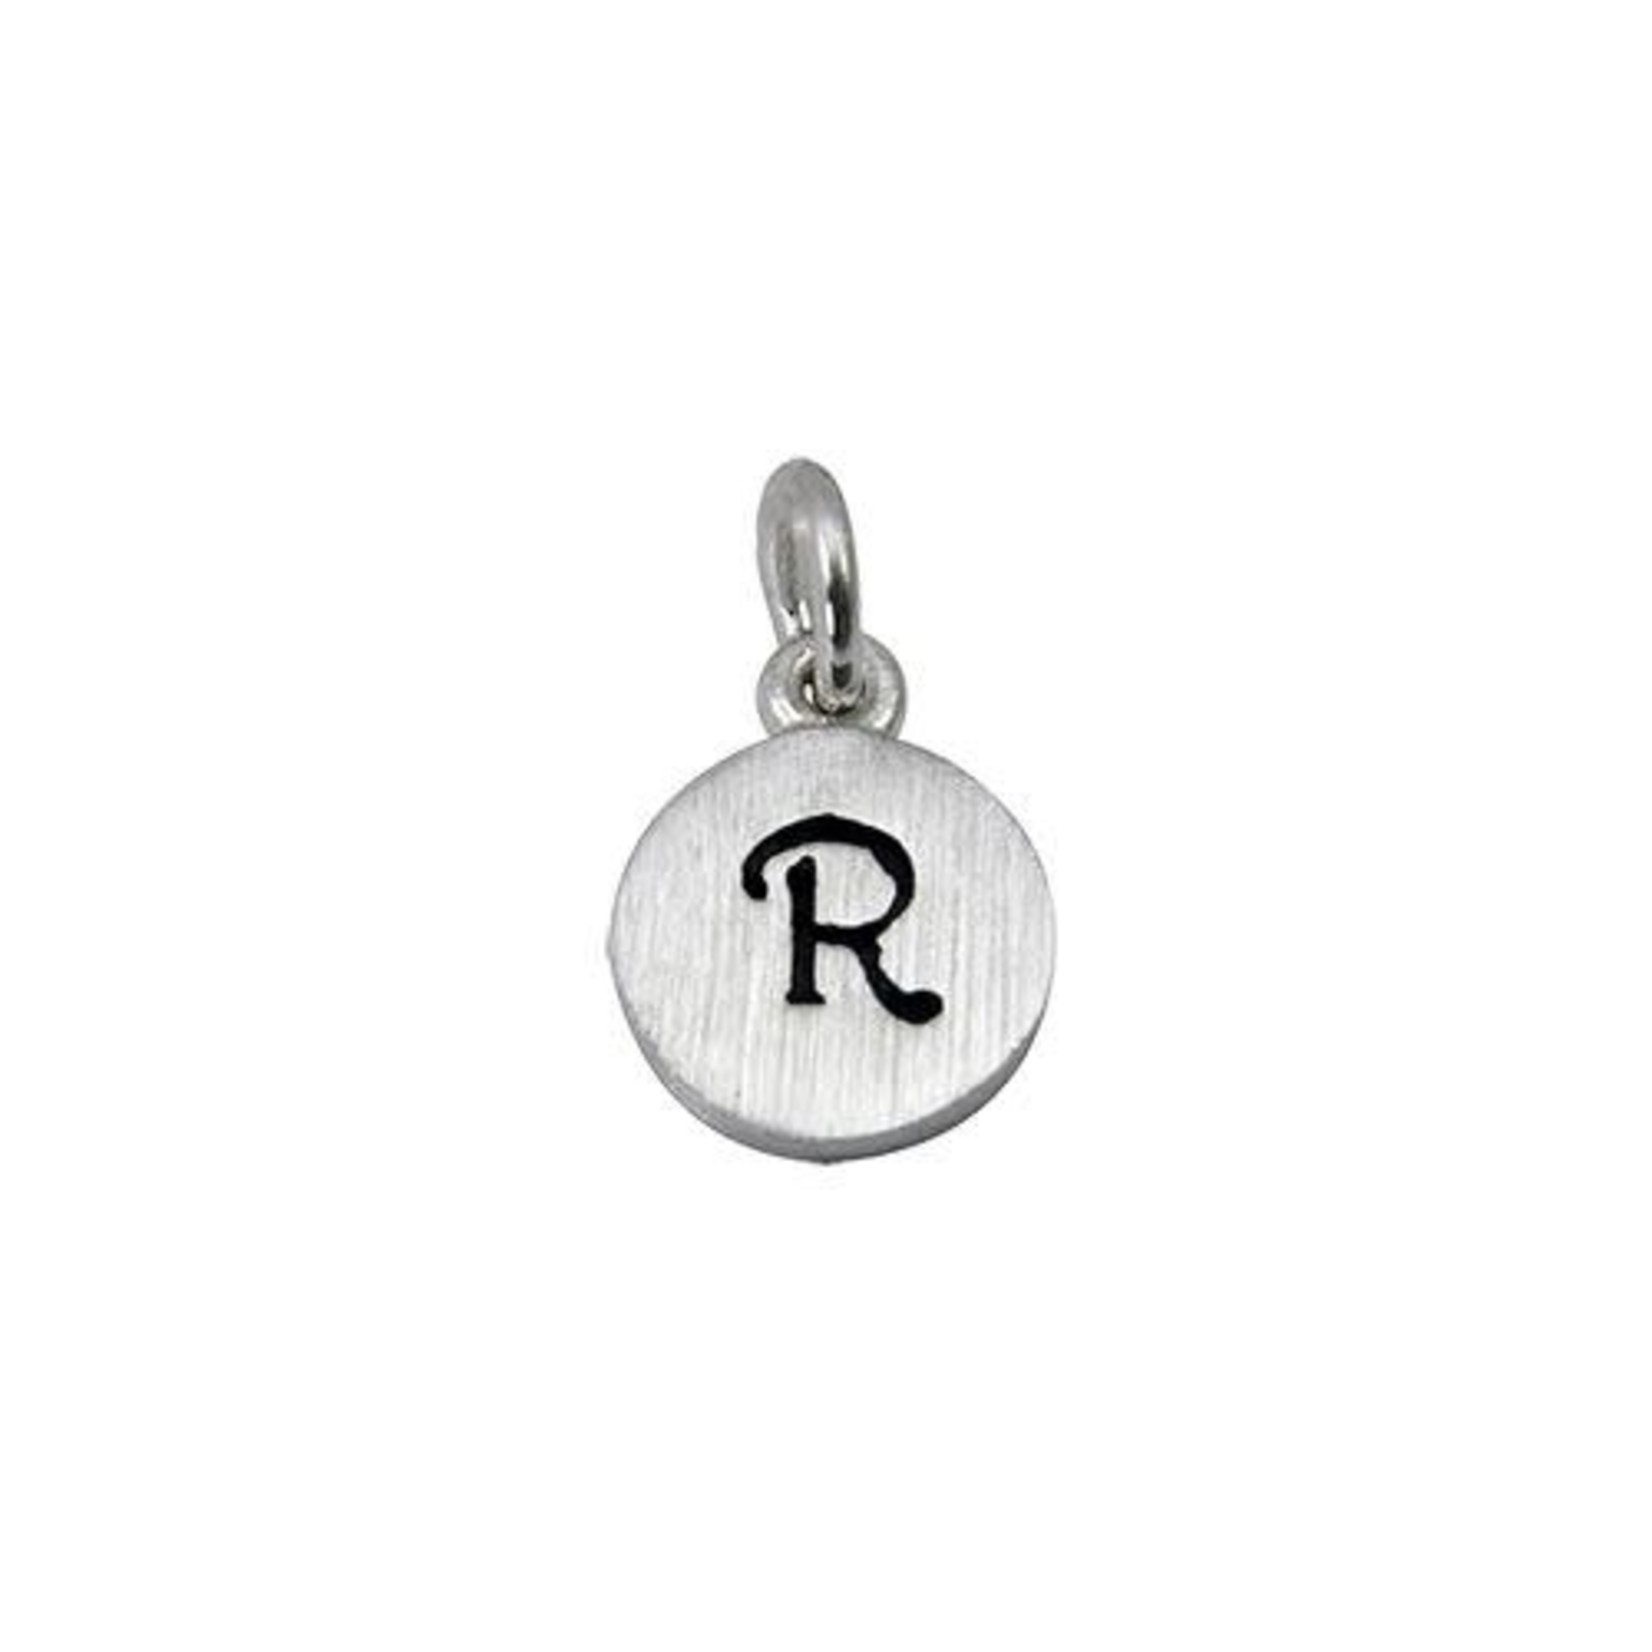 THE BERCO COMPANY, INC. Sterling Silver Round "R" Charm